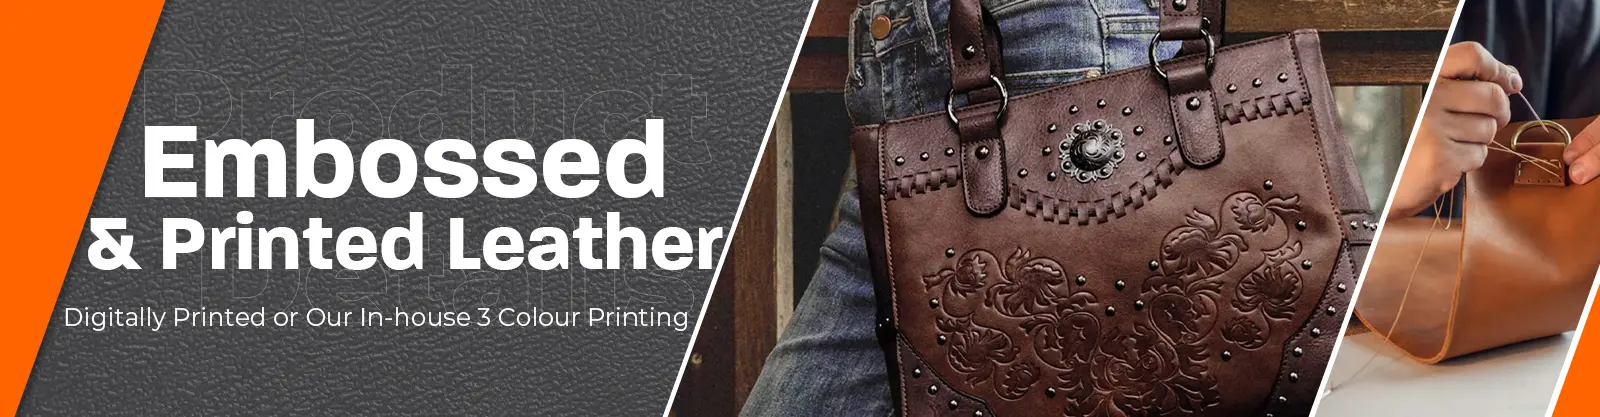 Embossed & Printed Artificial Leather in Gurgaon & Delhi/NCR, India